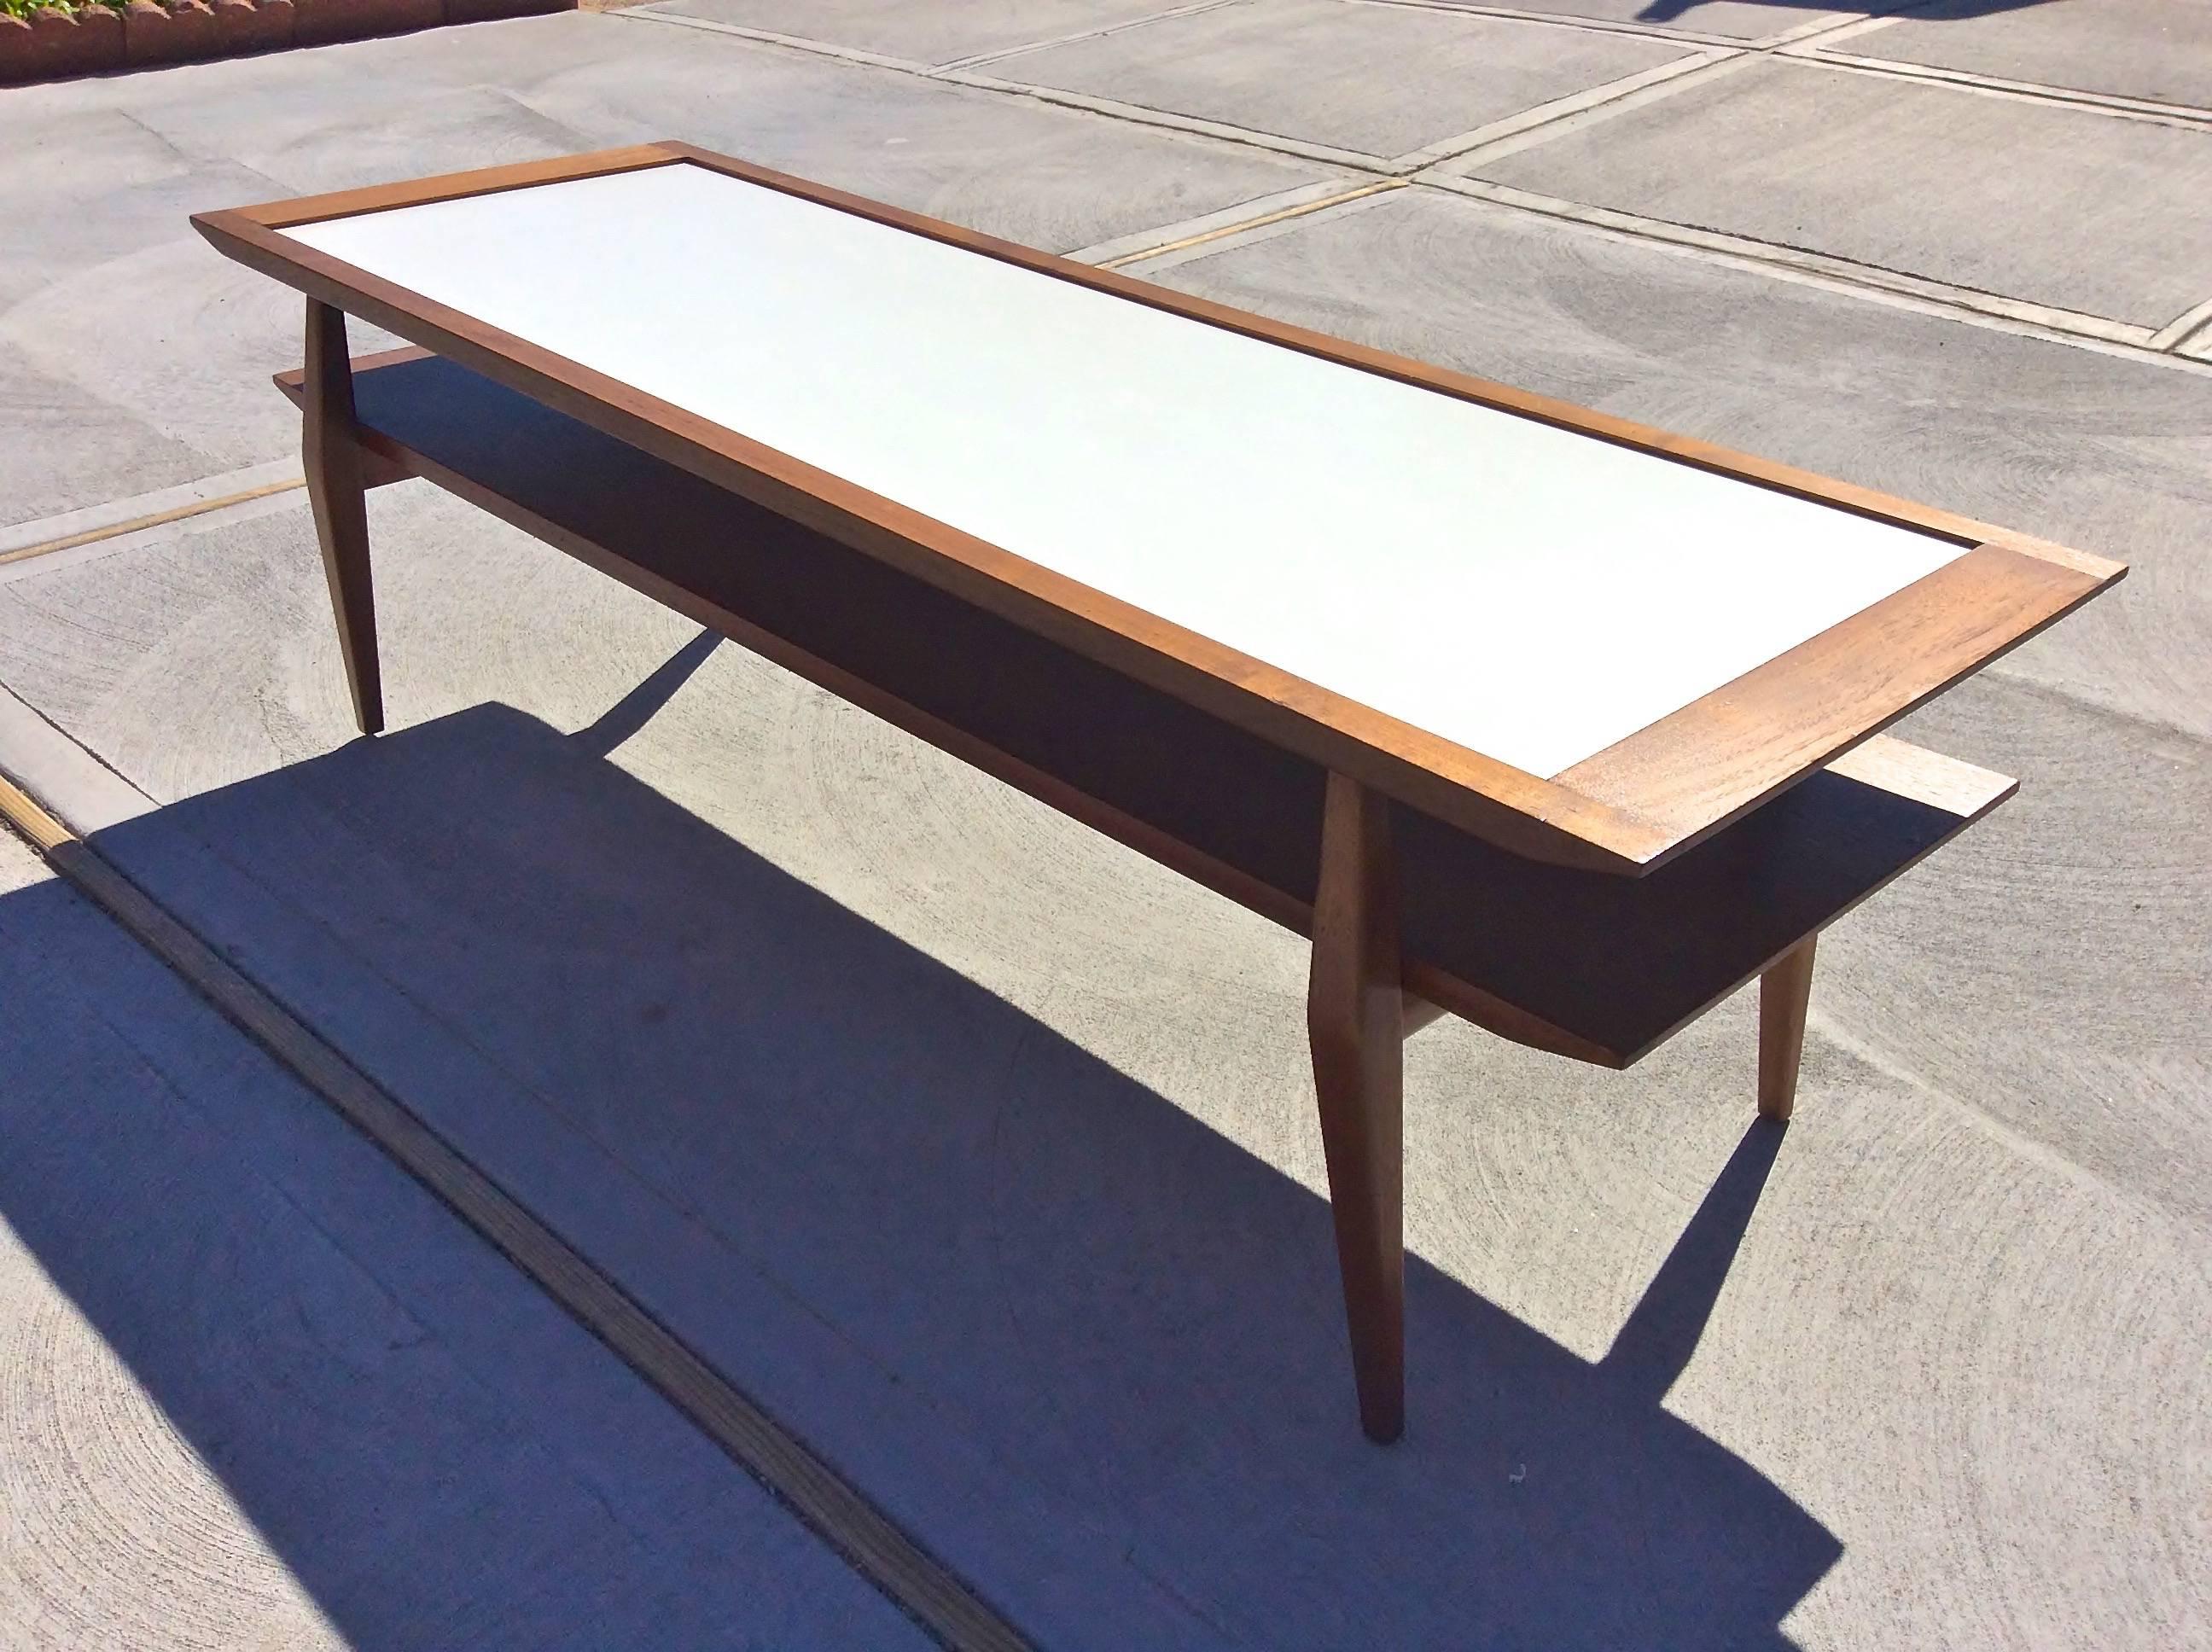 Model 2146 two-tier coffee table in solid walnut with inset white Micarta top designed by Gio Ponti for M. Singer & Sons, produced in Italy by Giordano Chiesa. 
Documented by Gio Ponti Archives. 
Occasionally misattributed to Bertha Schaefer.
Very